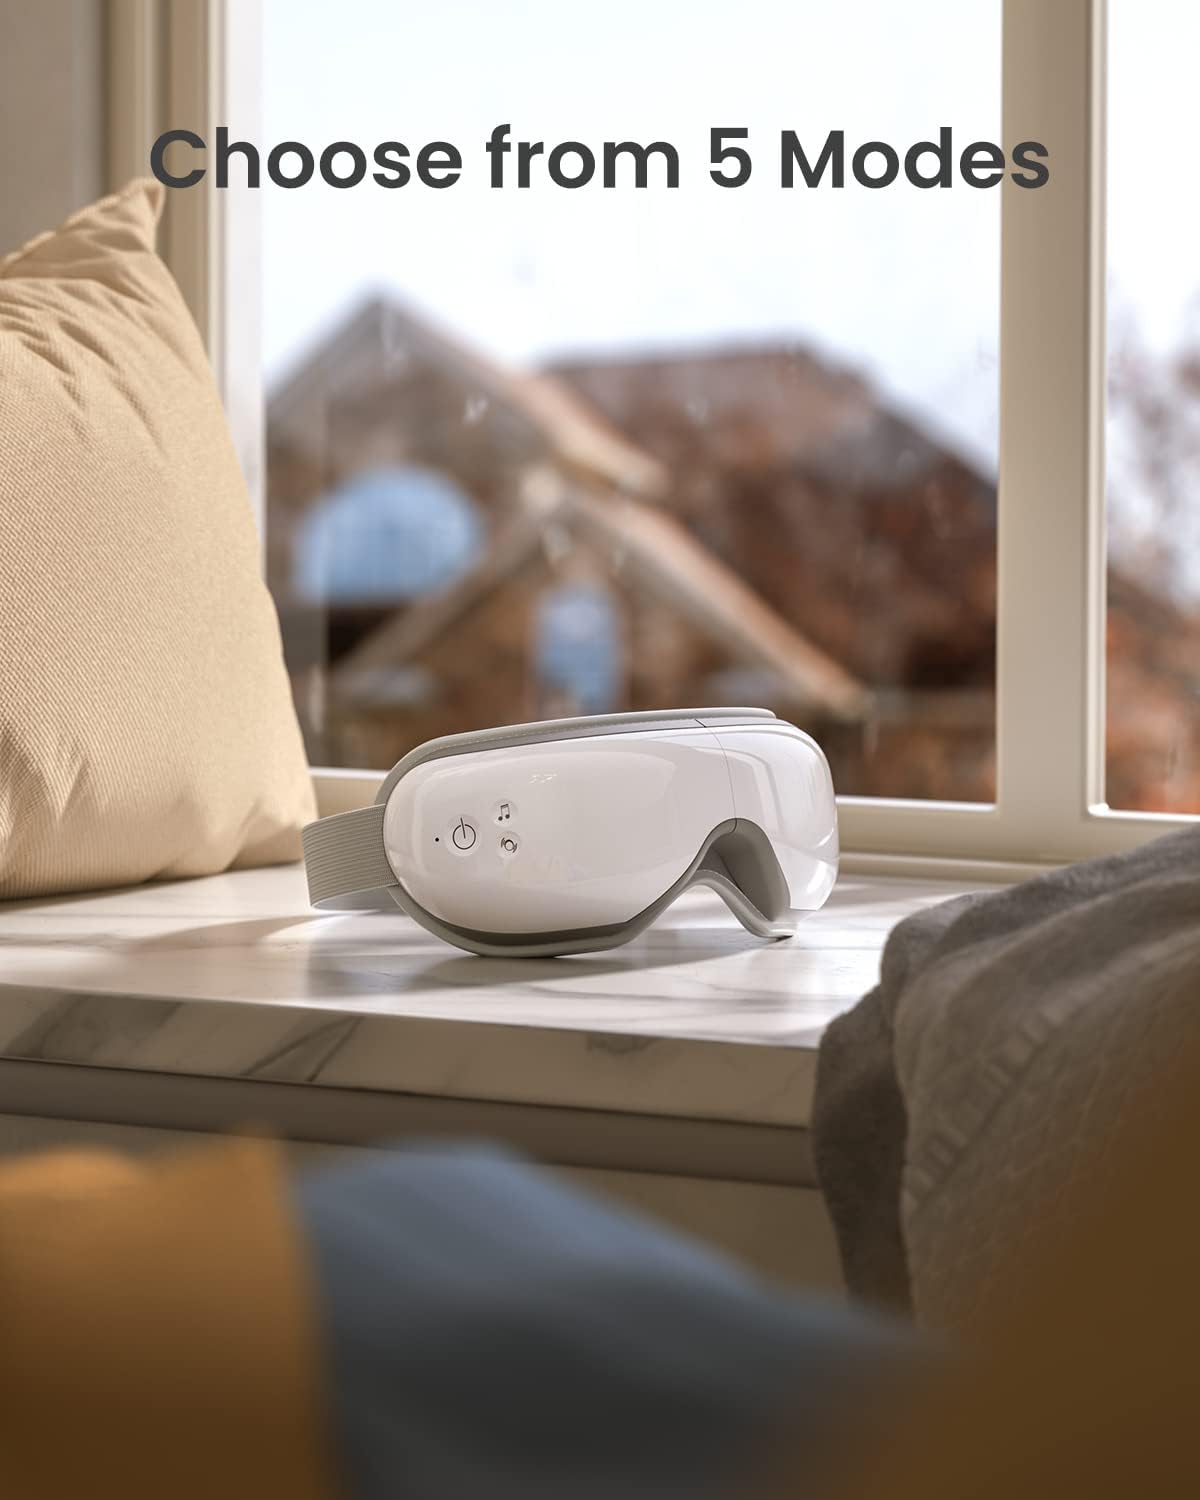 A Renpho Eyeris 1 Eye Massager rests on a windowsill, backlit by a sunny view of a house with an autumnal tree. The image highlights "choose from 5 modes" text, emphasizing the eye massager's features.